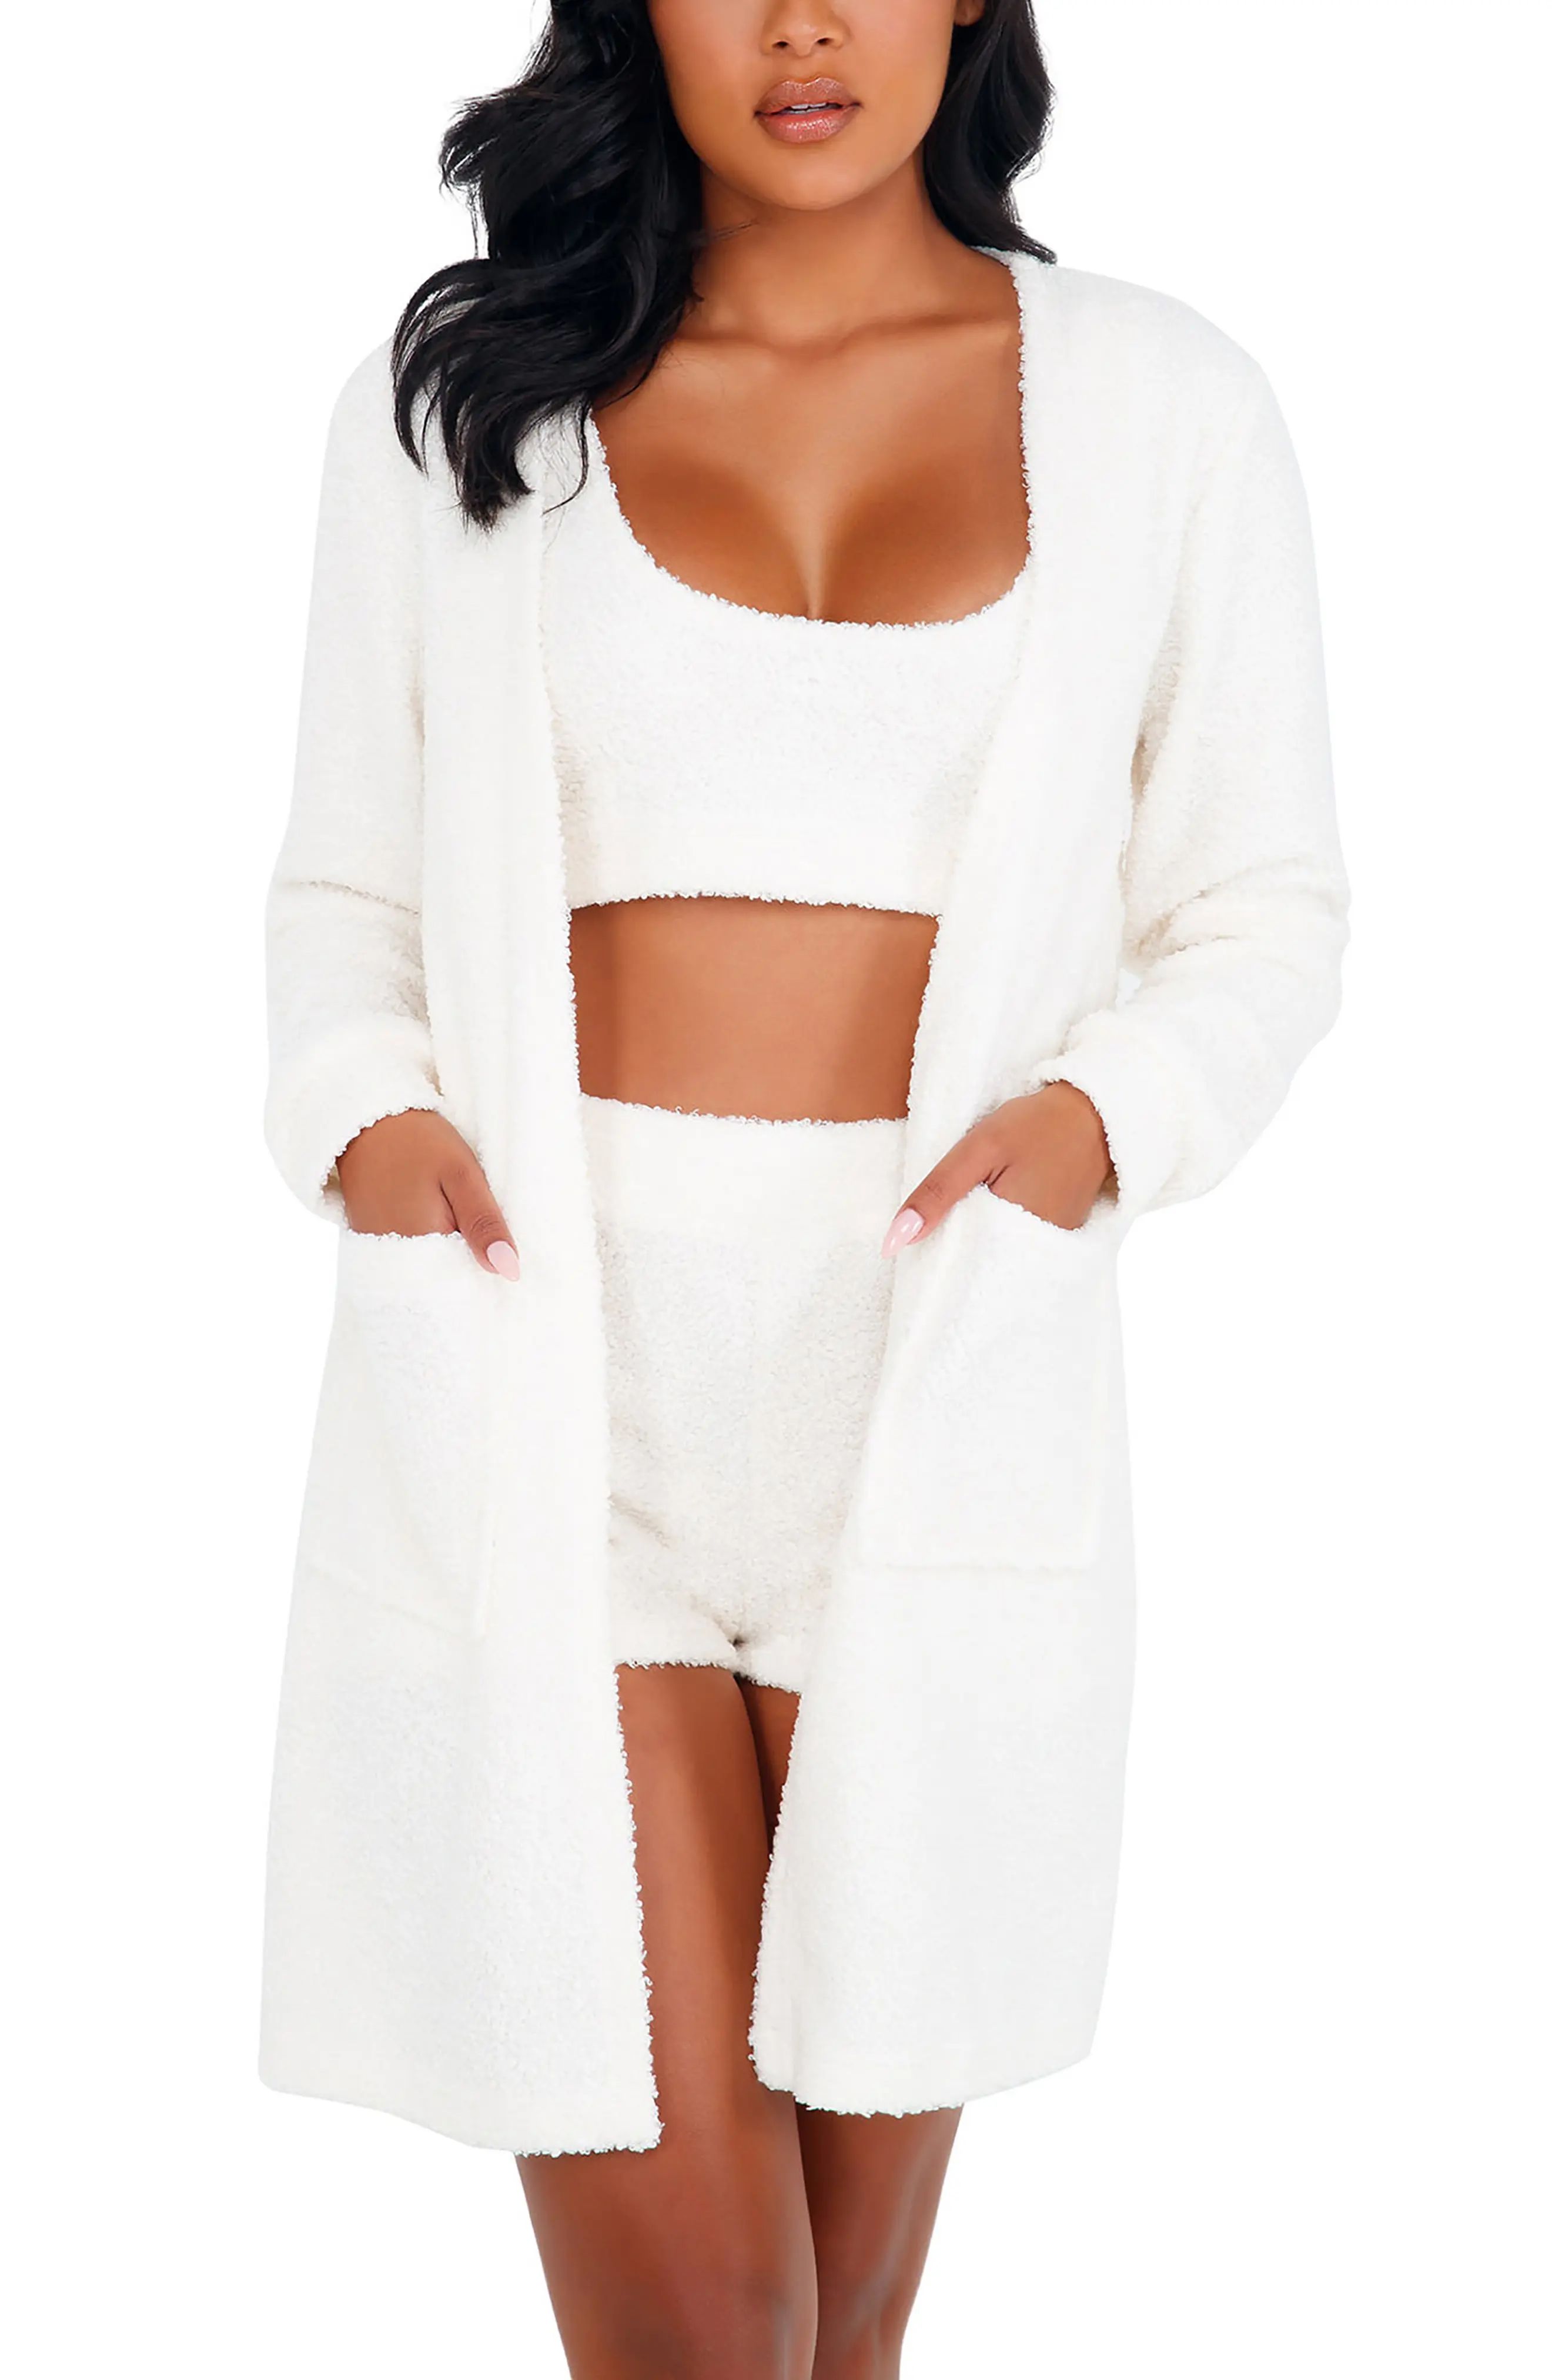 Roma Confidential Fuzzy Short Robe in White at Nordstrom, Size Small | Nordstrom